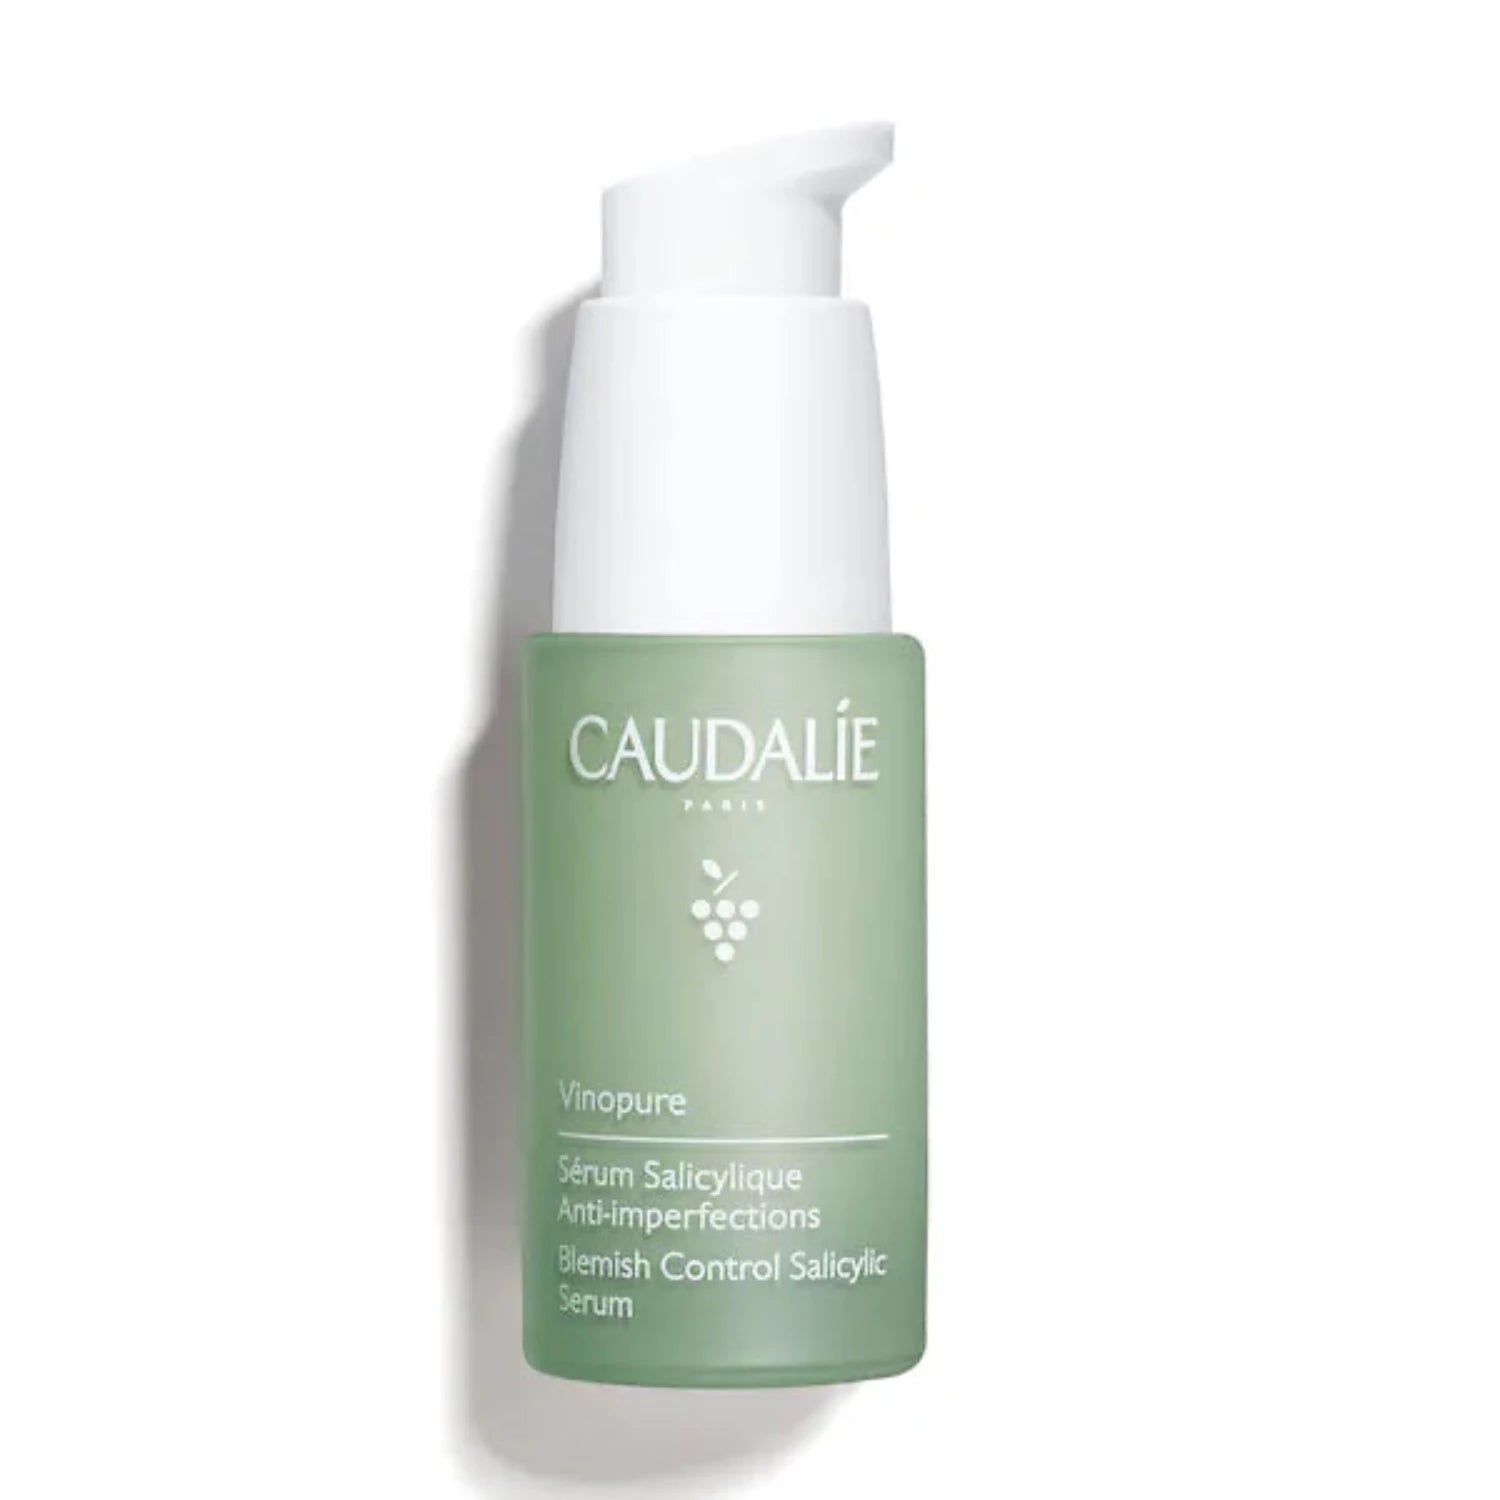 Why Caudalie Vinopure Serum? It reduces imperfections, unclogs and tightens pores, refines skin texture, and visibly improves the appearance of acne-prone skin.